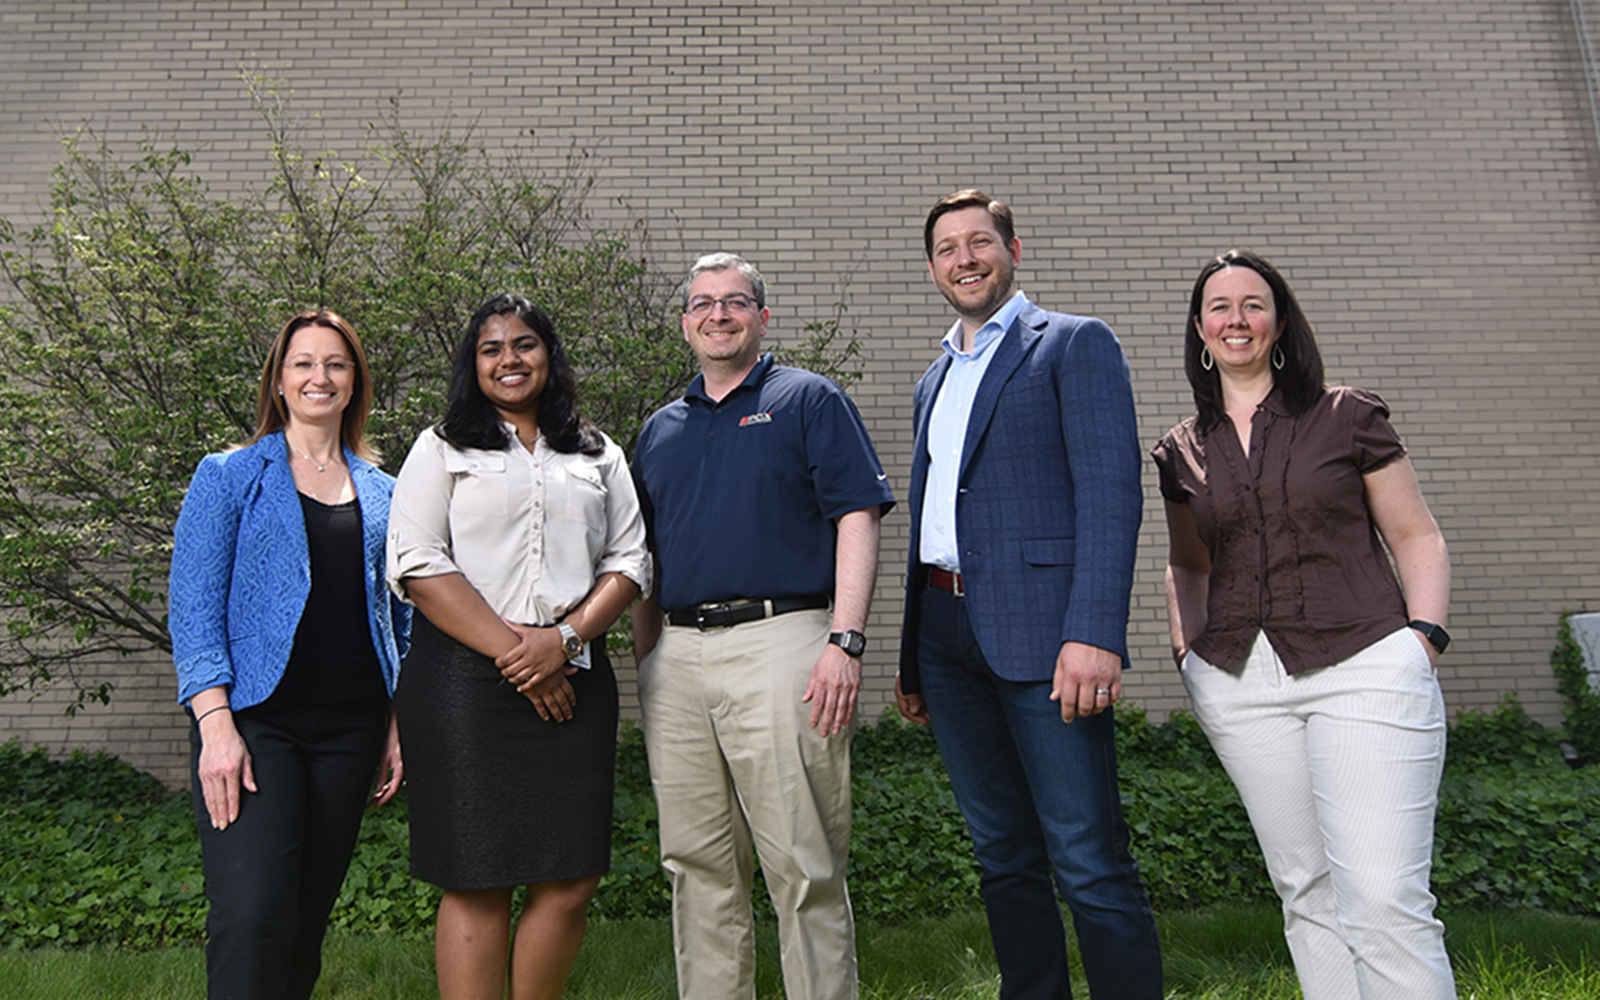 Left to right, professor Anna Radziwillowicz, MSBAPM student Chitra Reddy, PCX general manager and COO Aris Fotos, MBA Student Don Pendagast, and professor Jennifer Eigos. (Nathan Oldham / UConn School of Business)